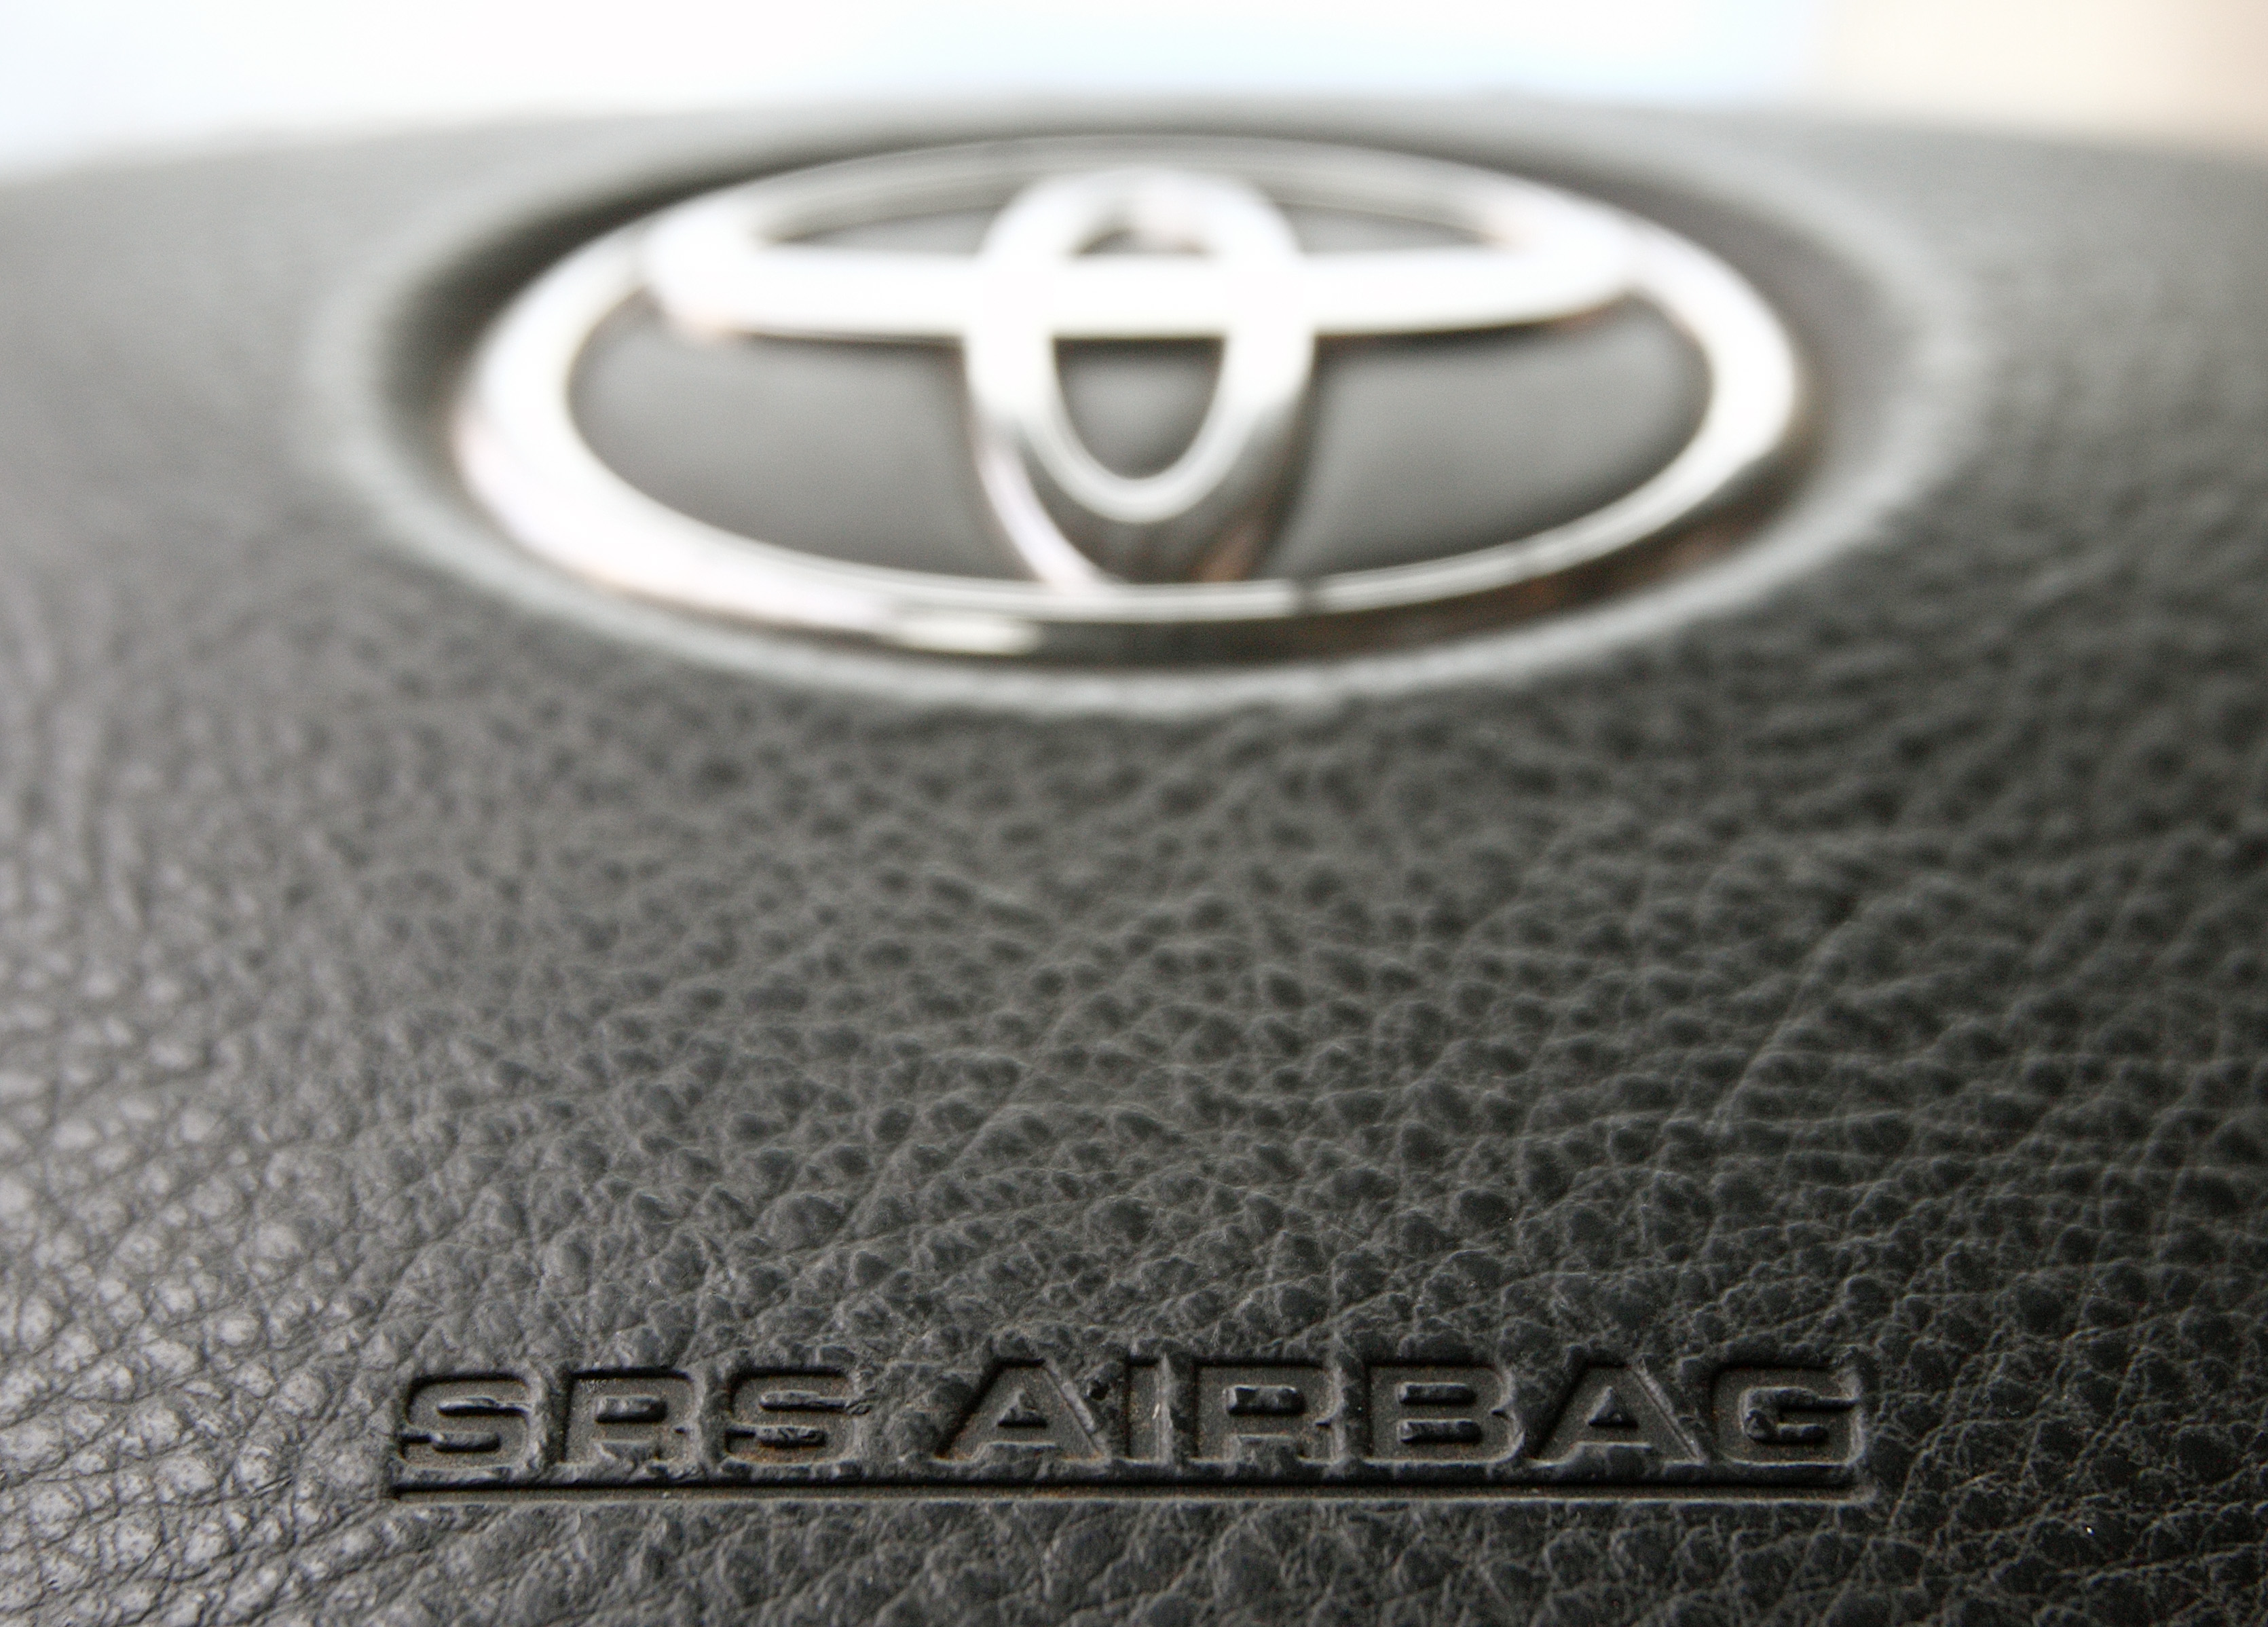 The steering wheel of a Toyota car which contains an airbag is pictured in Vienna